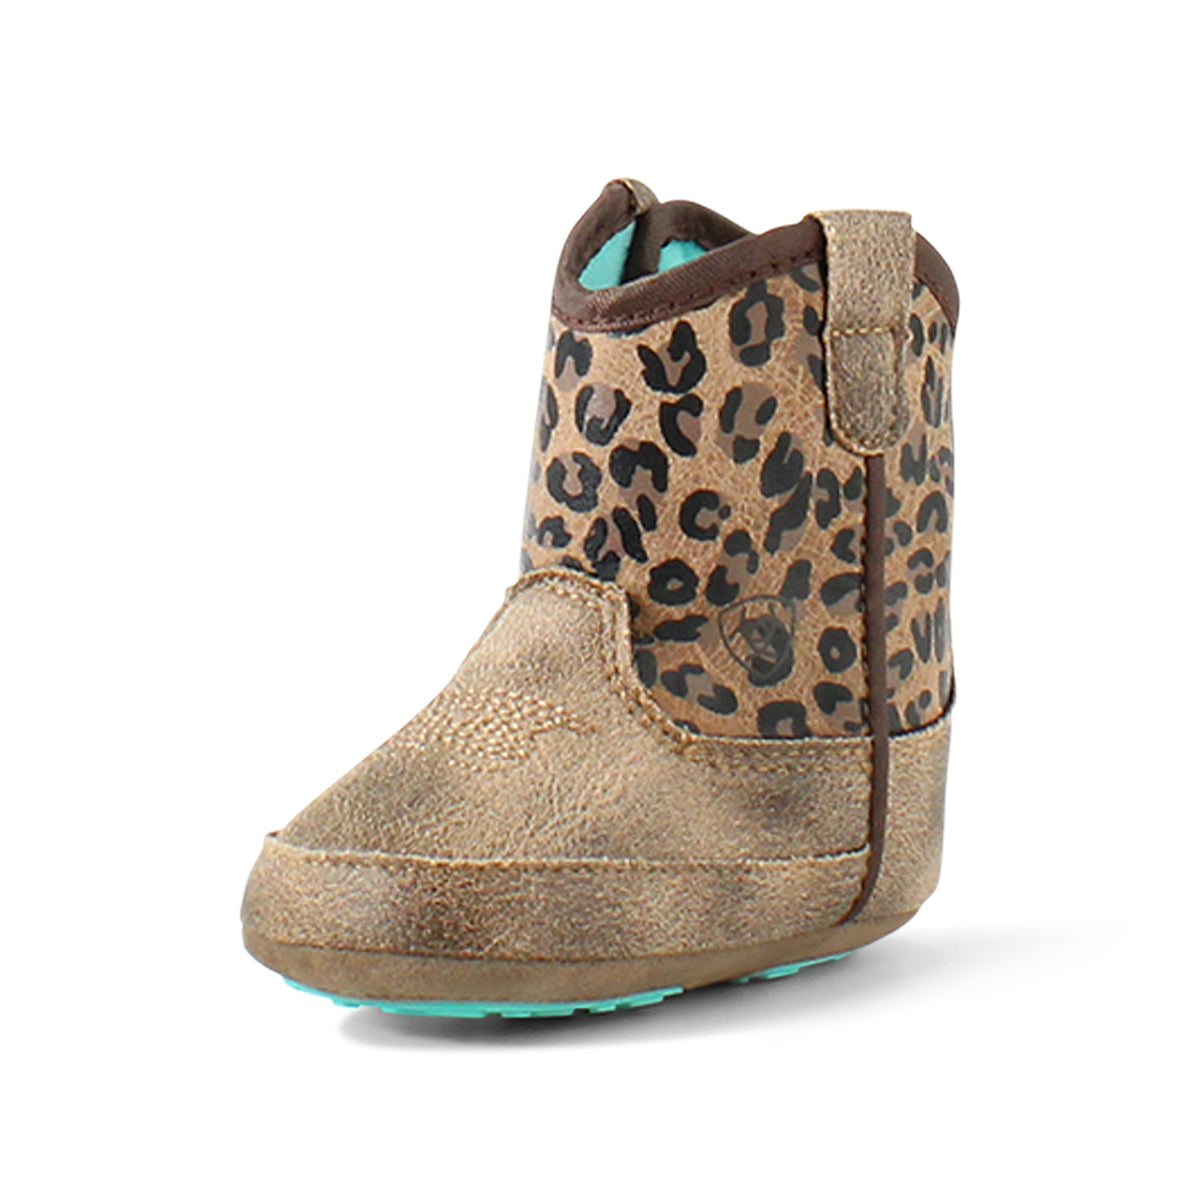 Ariat Savanna Style Lil' Stompers Infant Boots